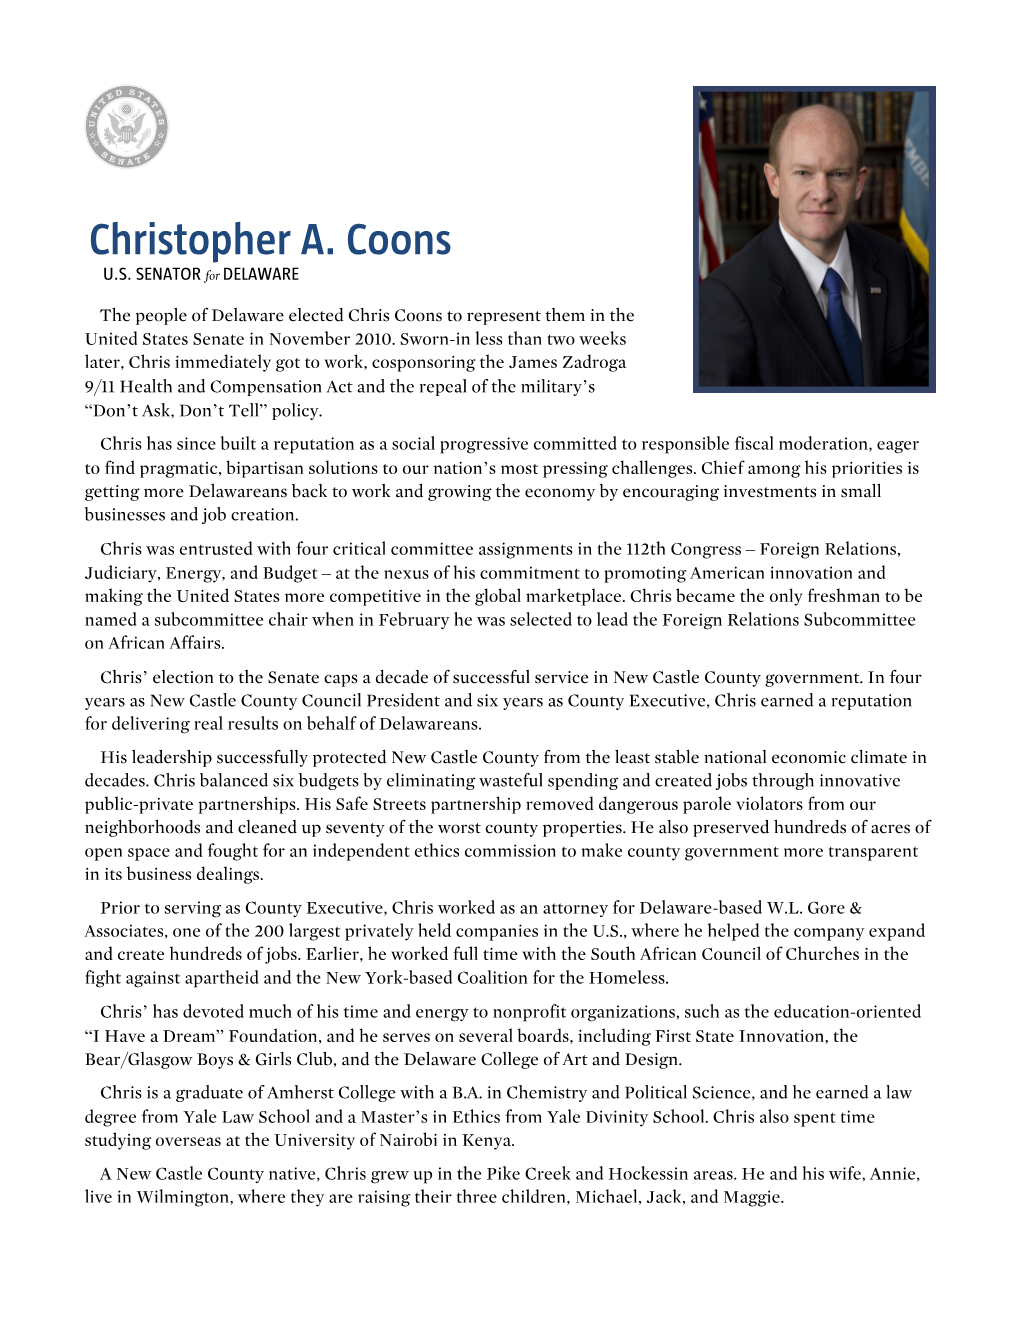 Official Biography of Chris Coons